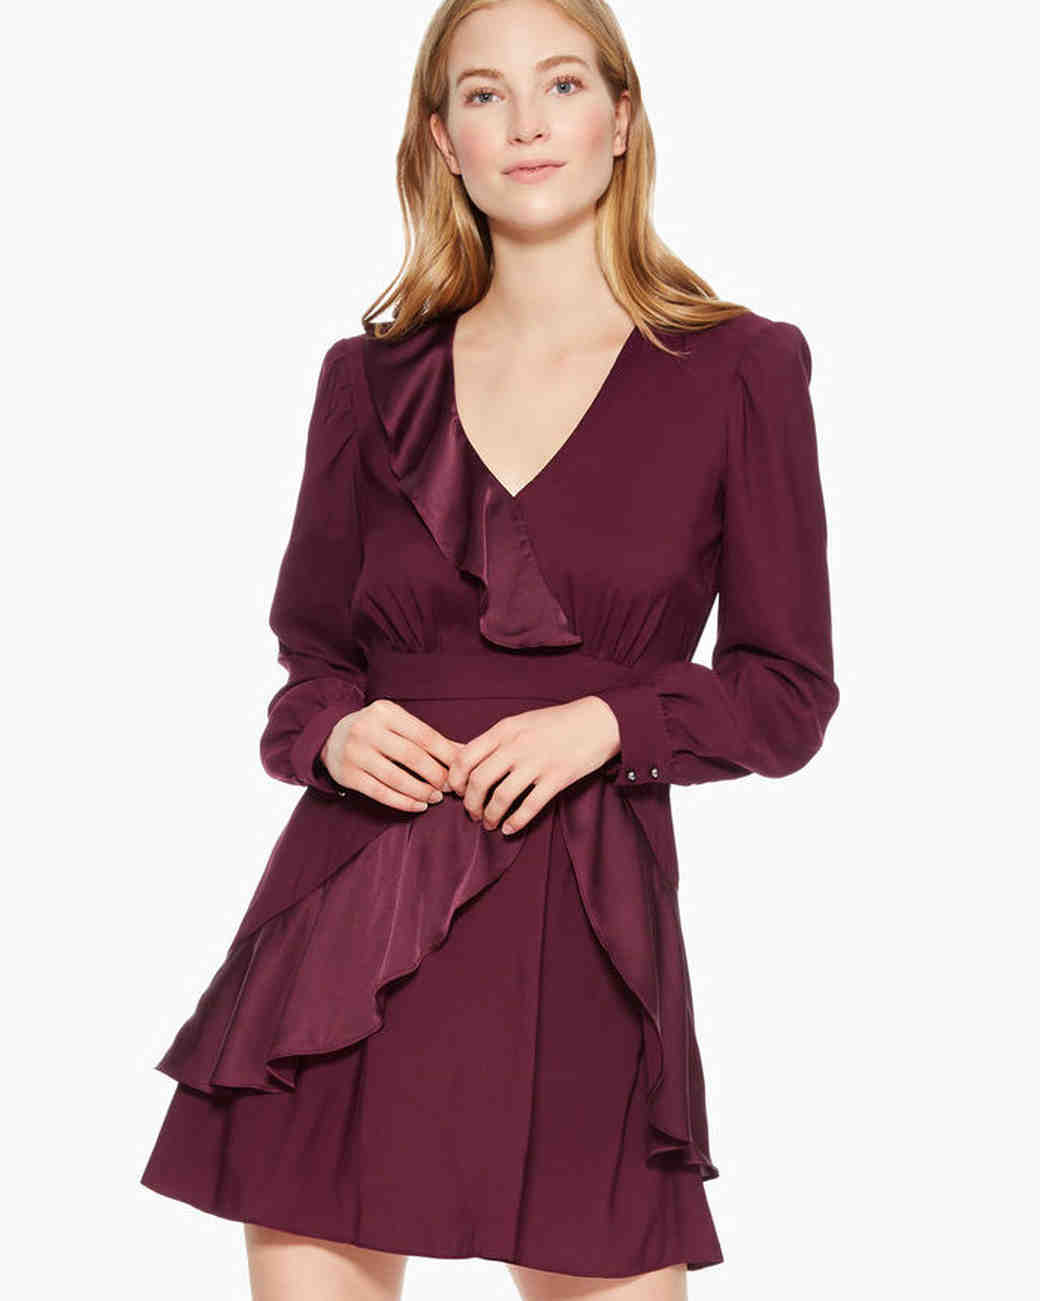 25 Beautiful Dresses to Wear as a Wedding Guest This Fall | Martha